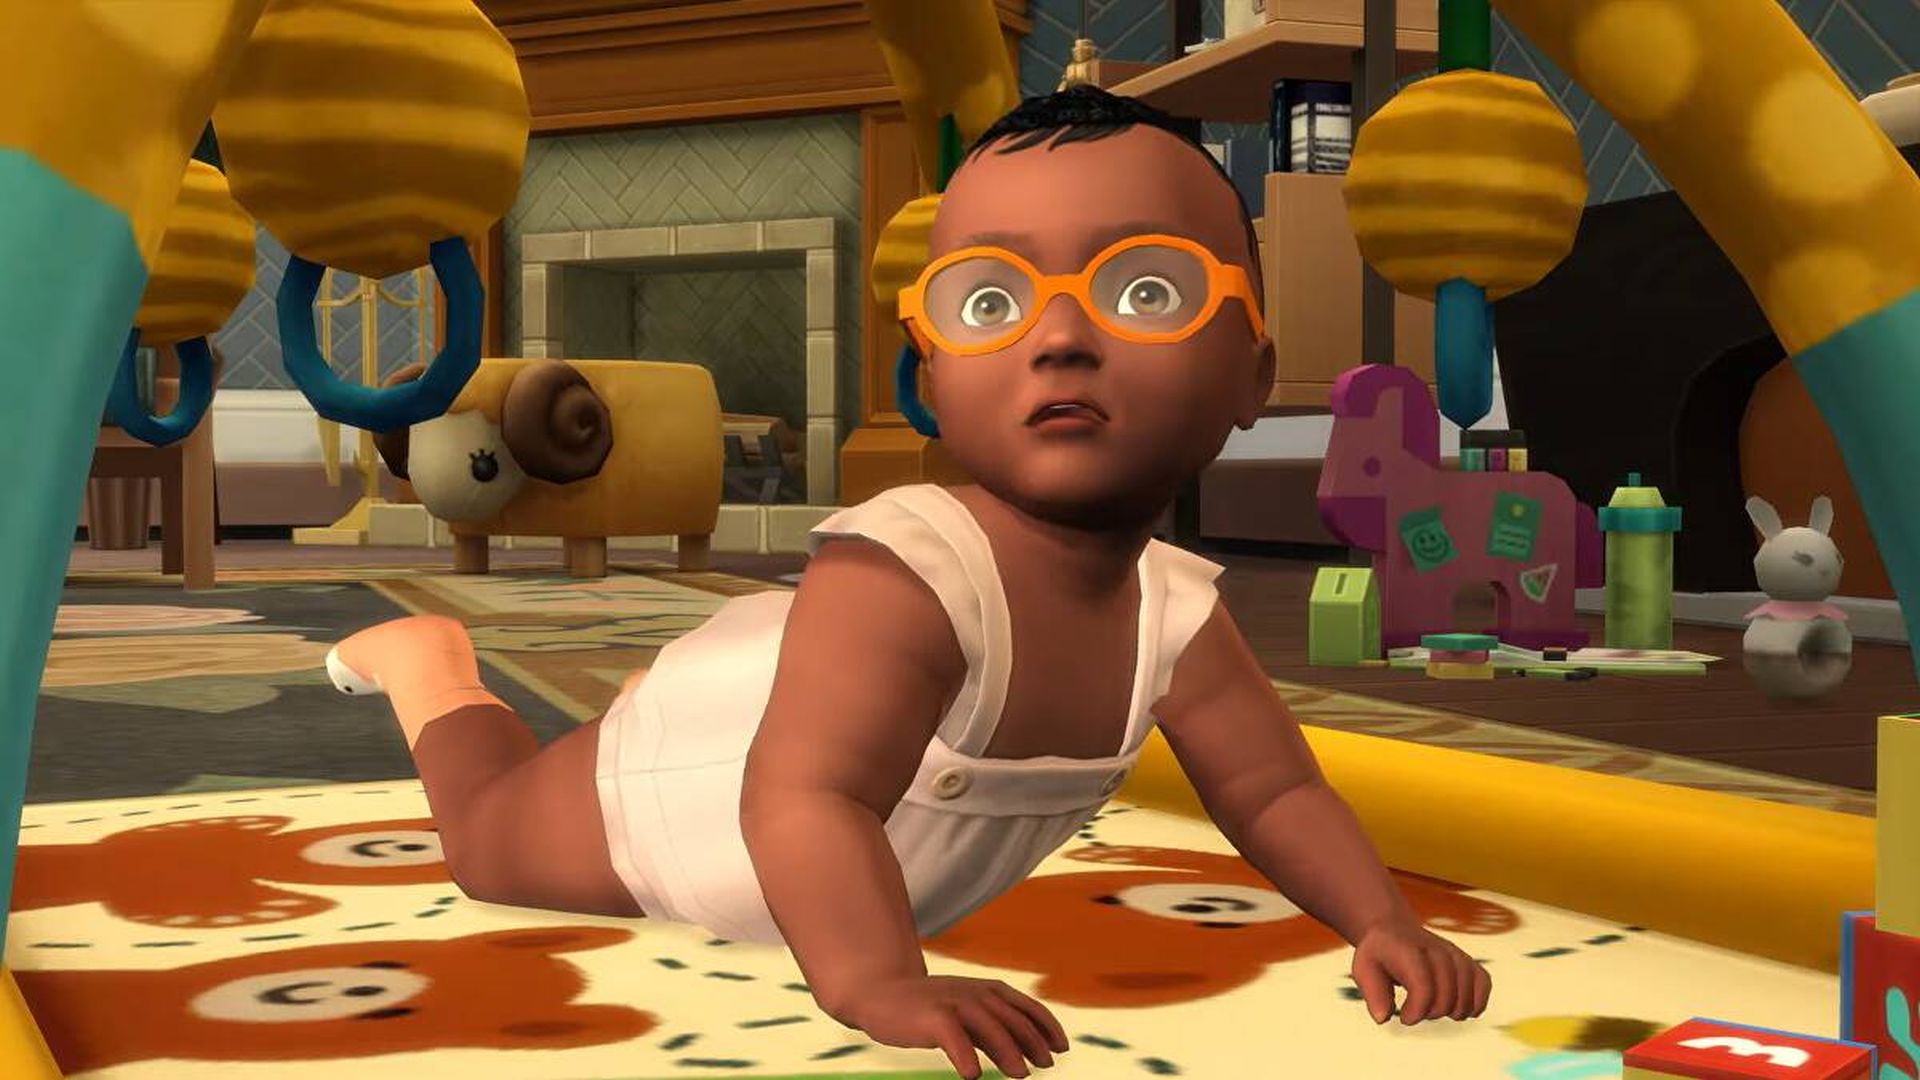 Sims 4 all infant milestones take time to complete, but there are some tips and tricks and this guide will show you how to complete them all!